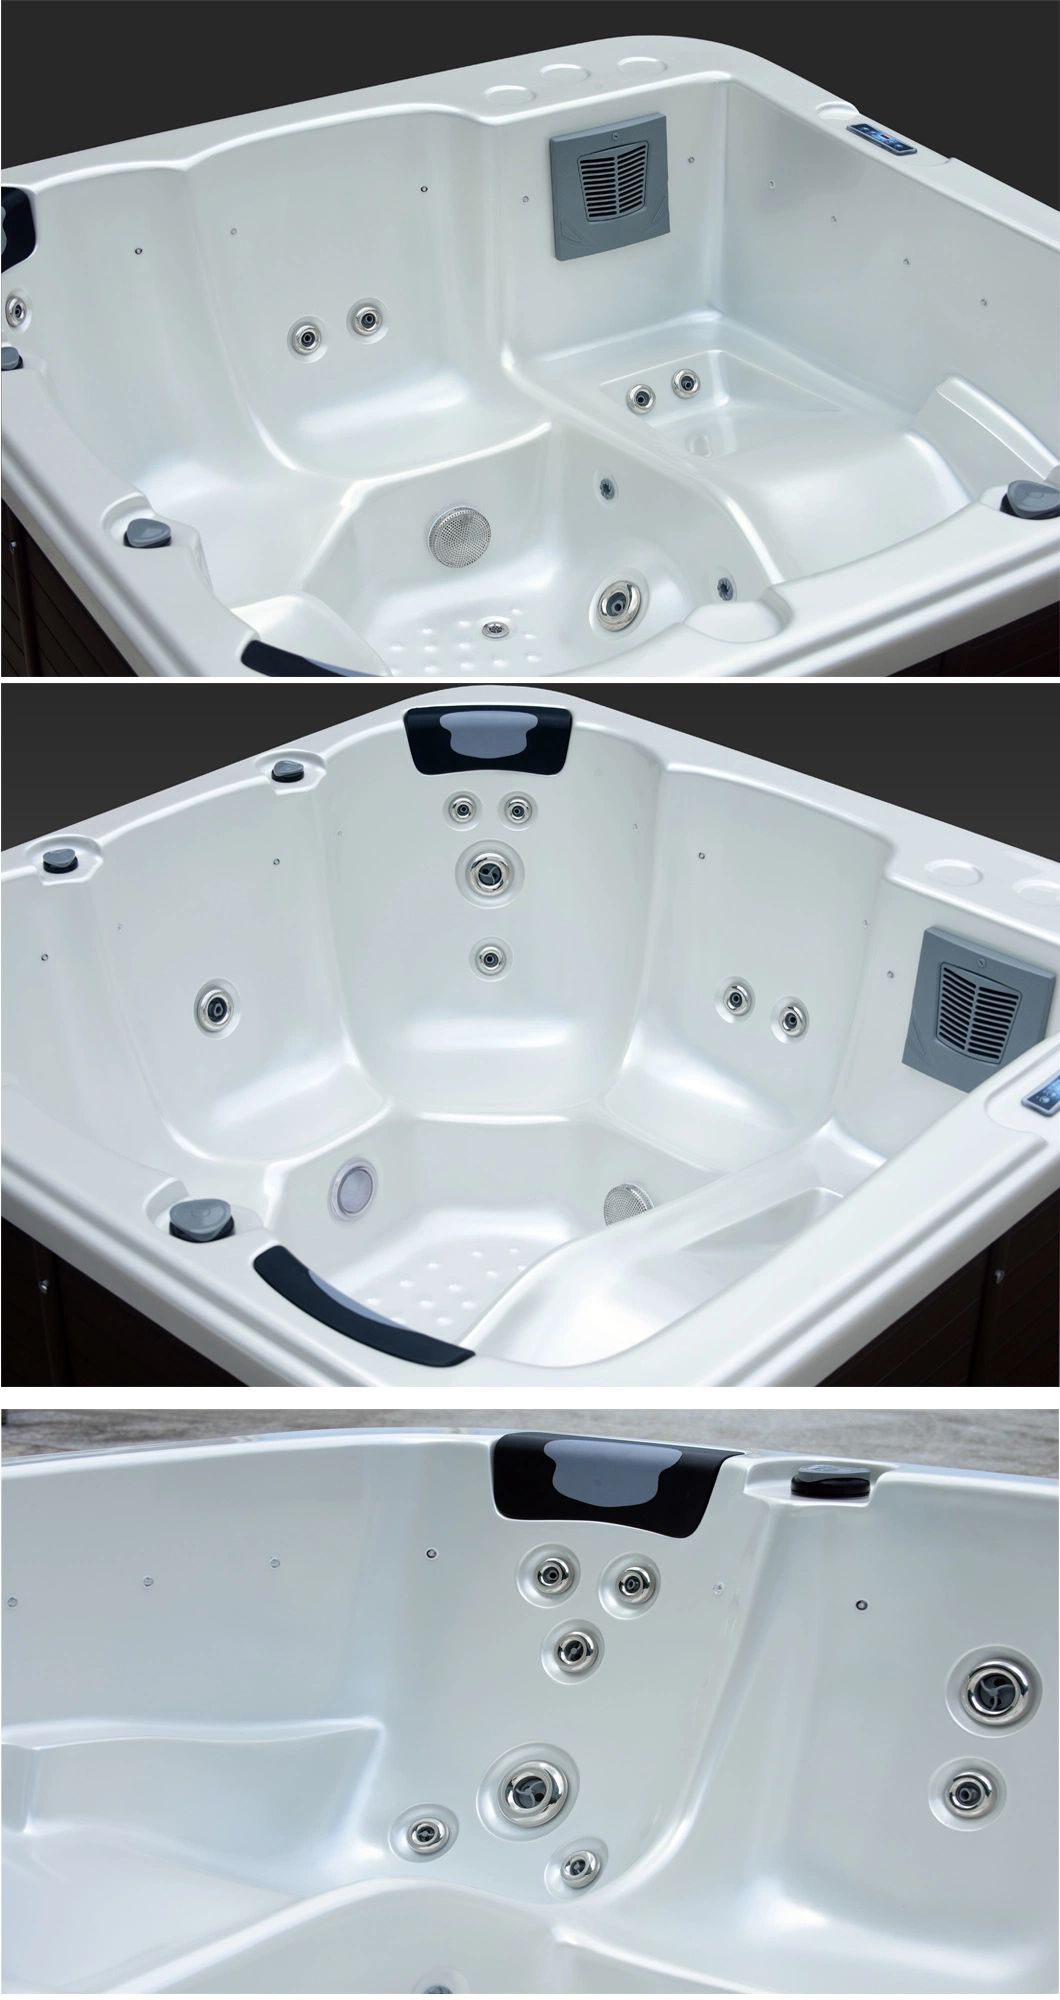 Hot Tub with Stable Quality Hotspring SPA Design and Strong Massage Jets